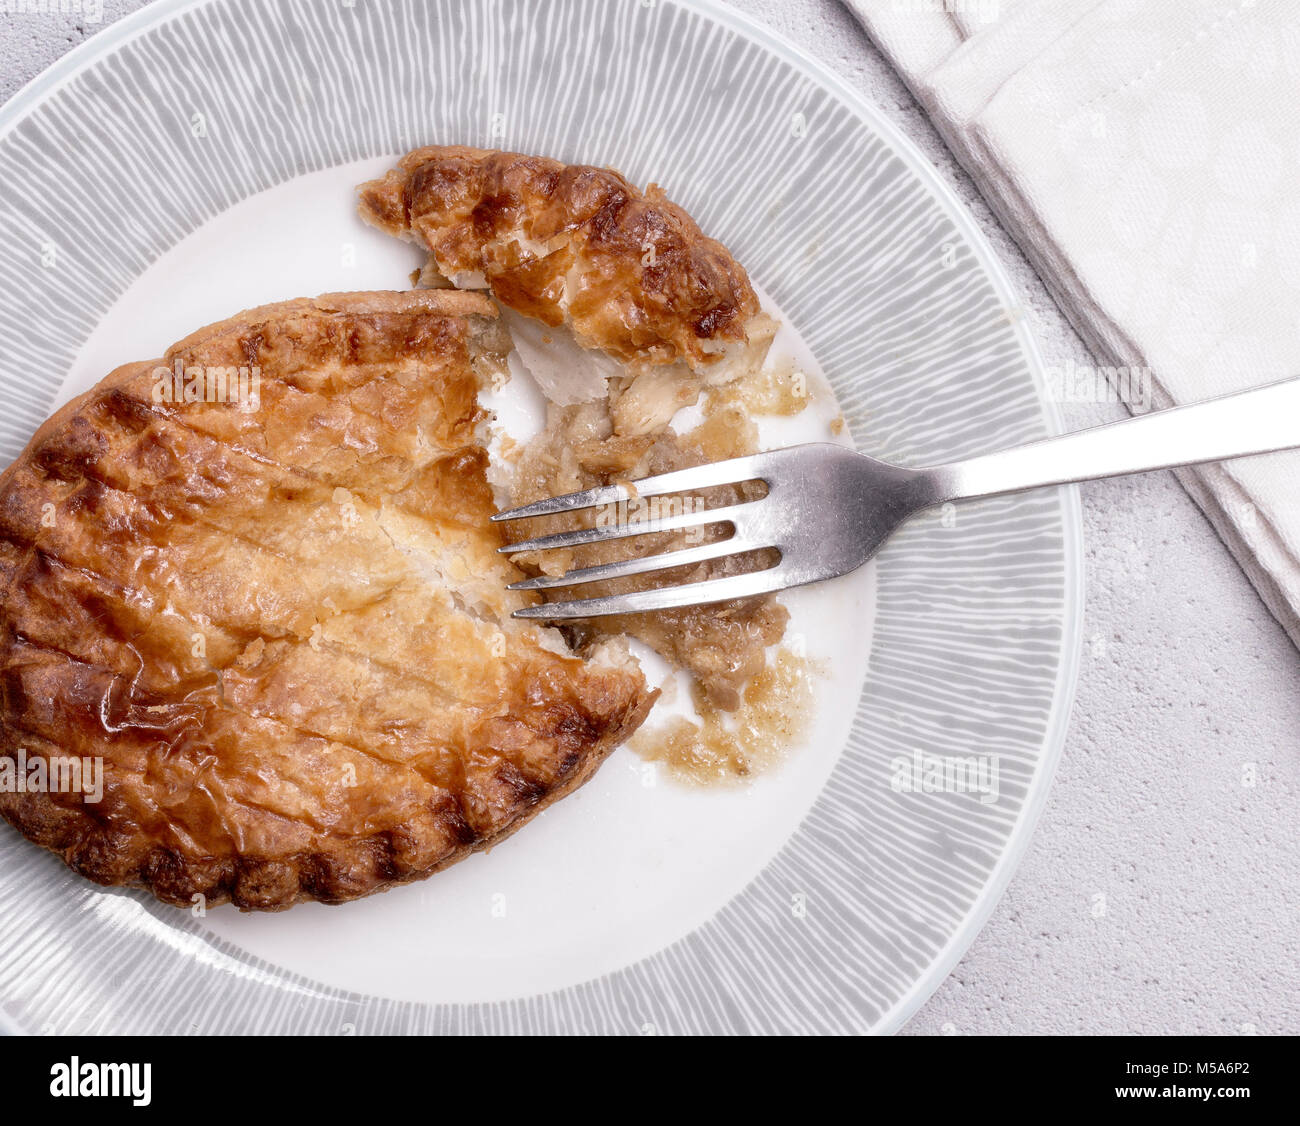 Overhead View of a Chicken pie on a plate with fork and napkin. Stock Photo